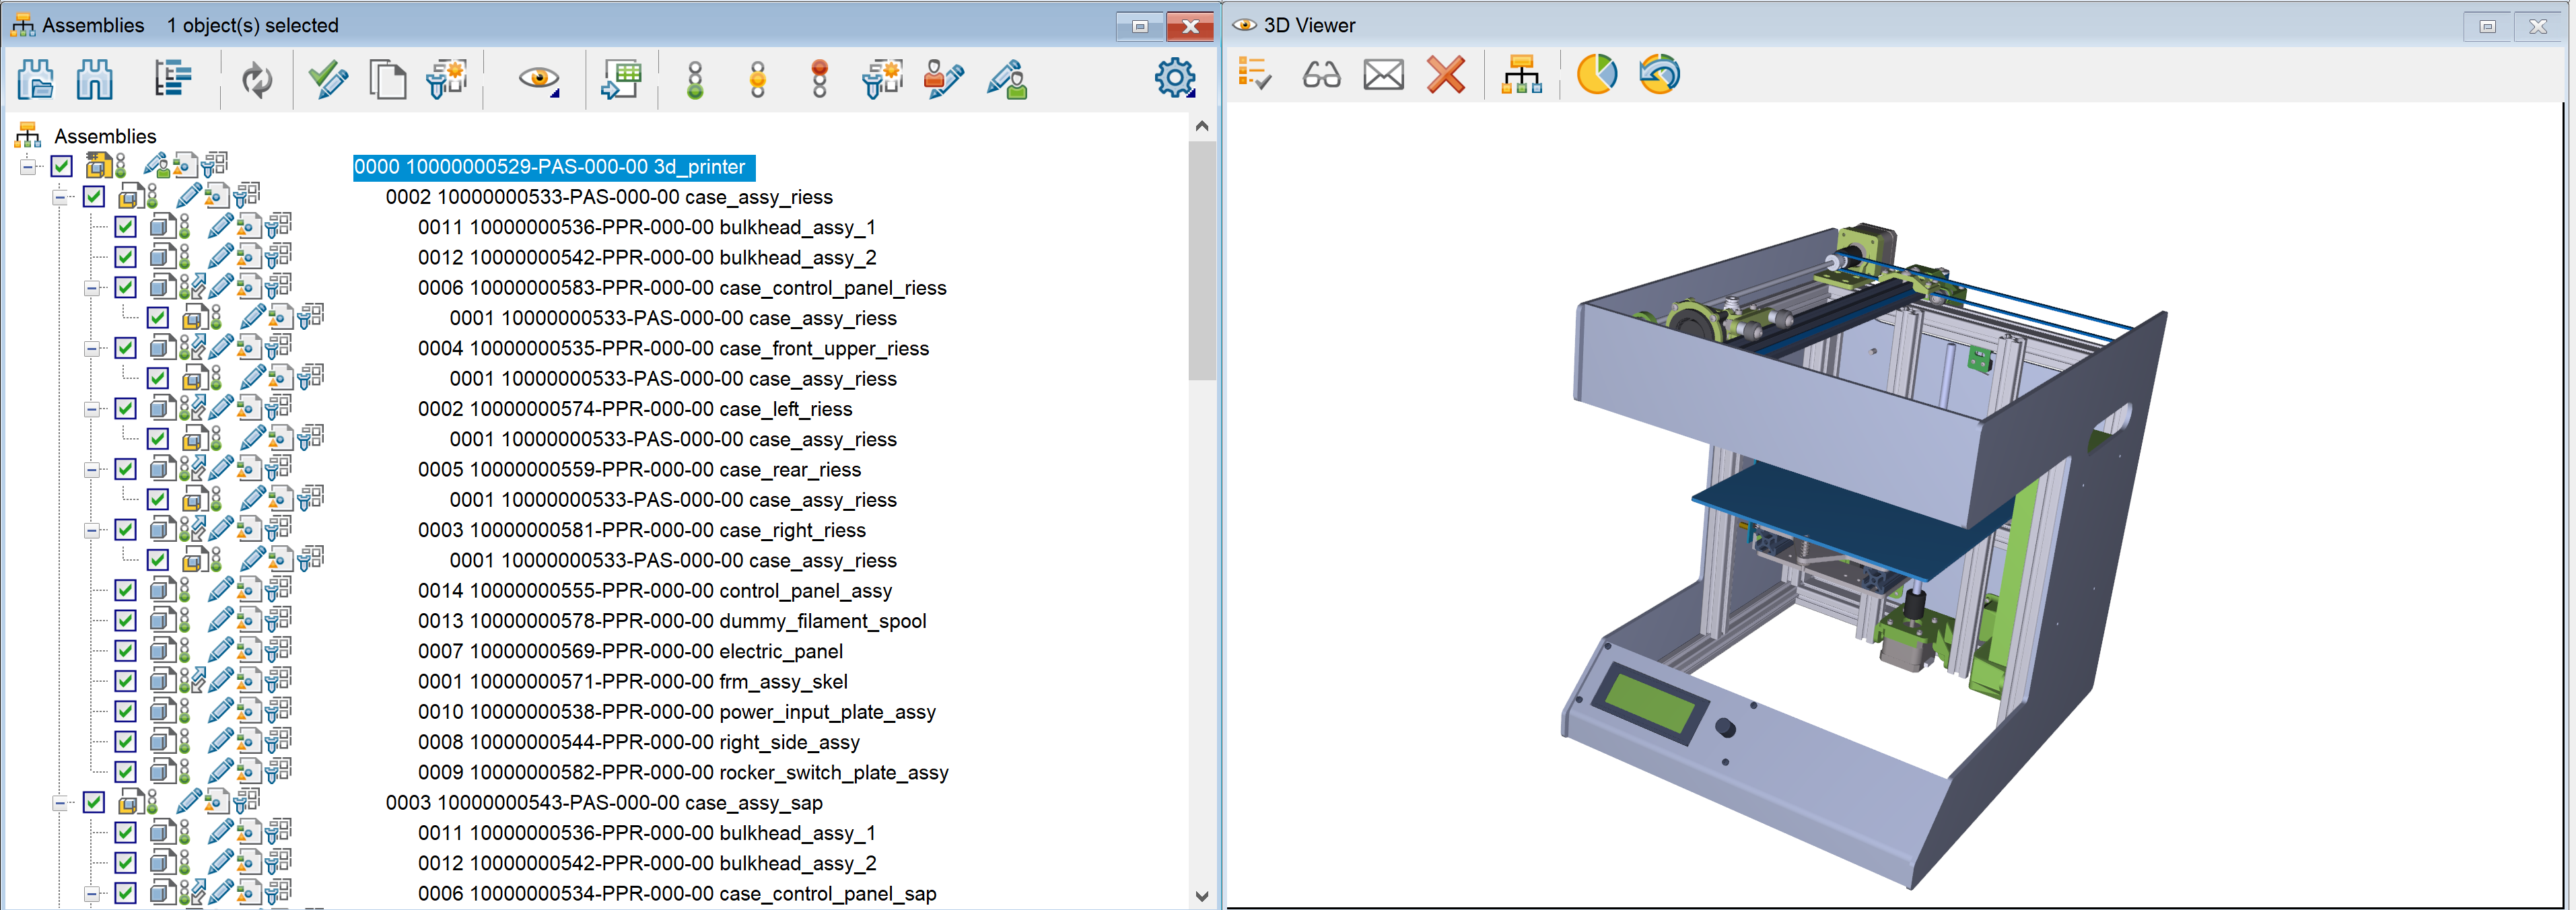 Combined view of Assembly window and SAP 3D Visual Enterprise Viewer